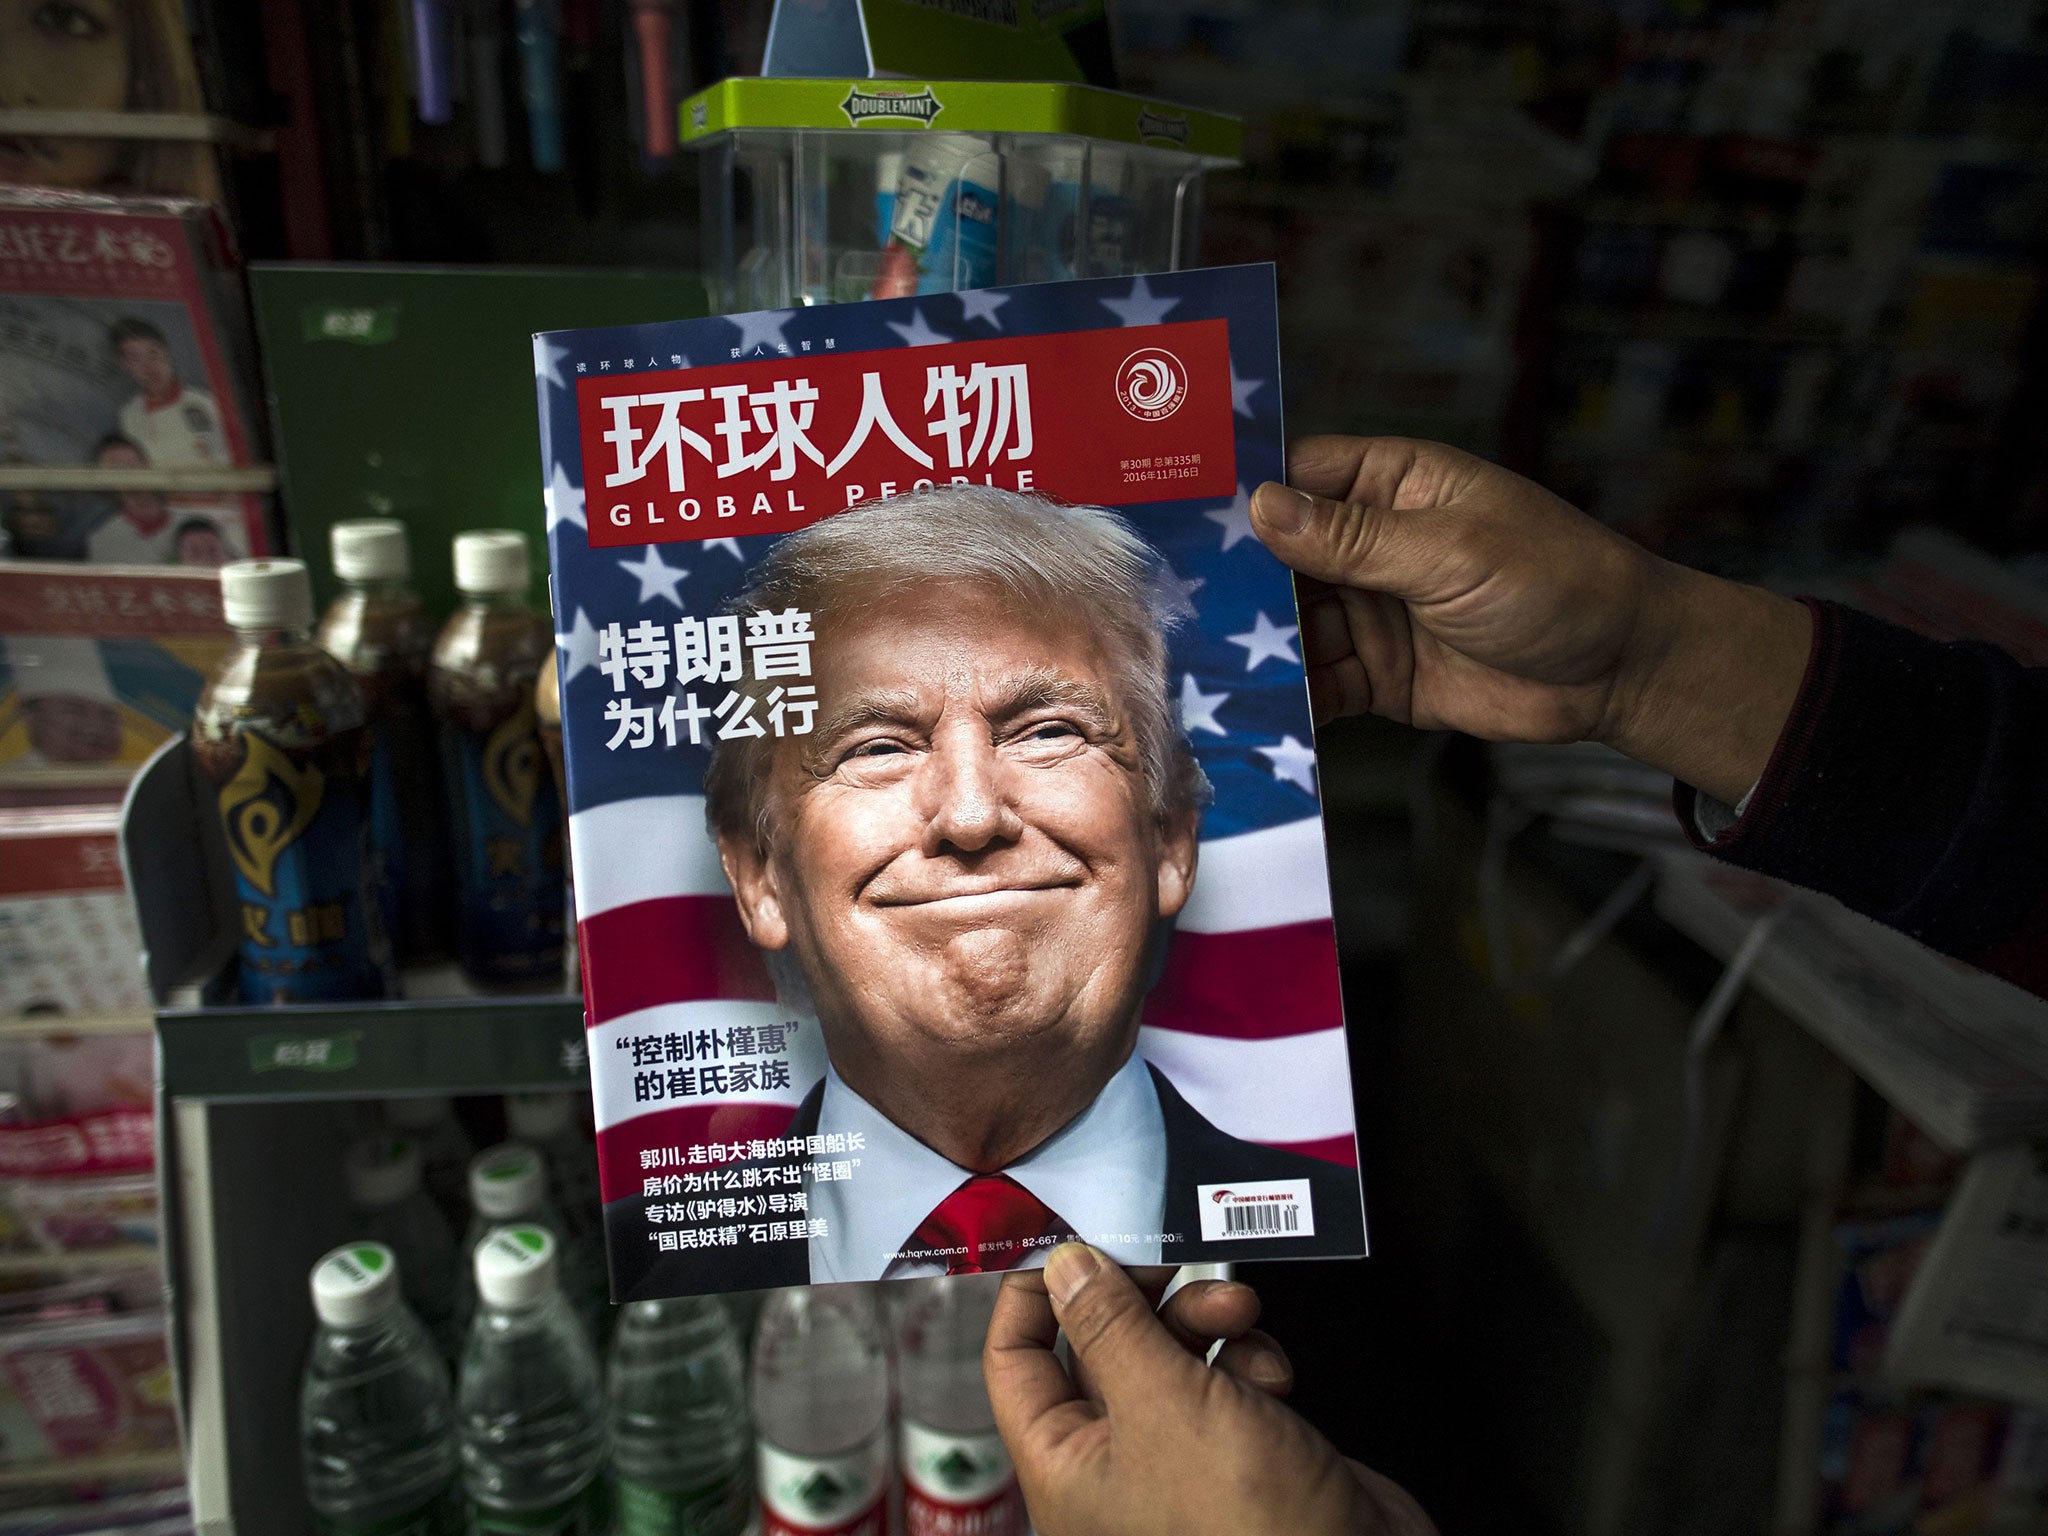 Trump often invoked China during his campaign, threatening to slap tariffs on its exports